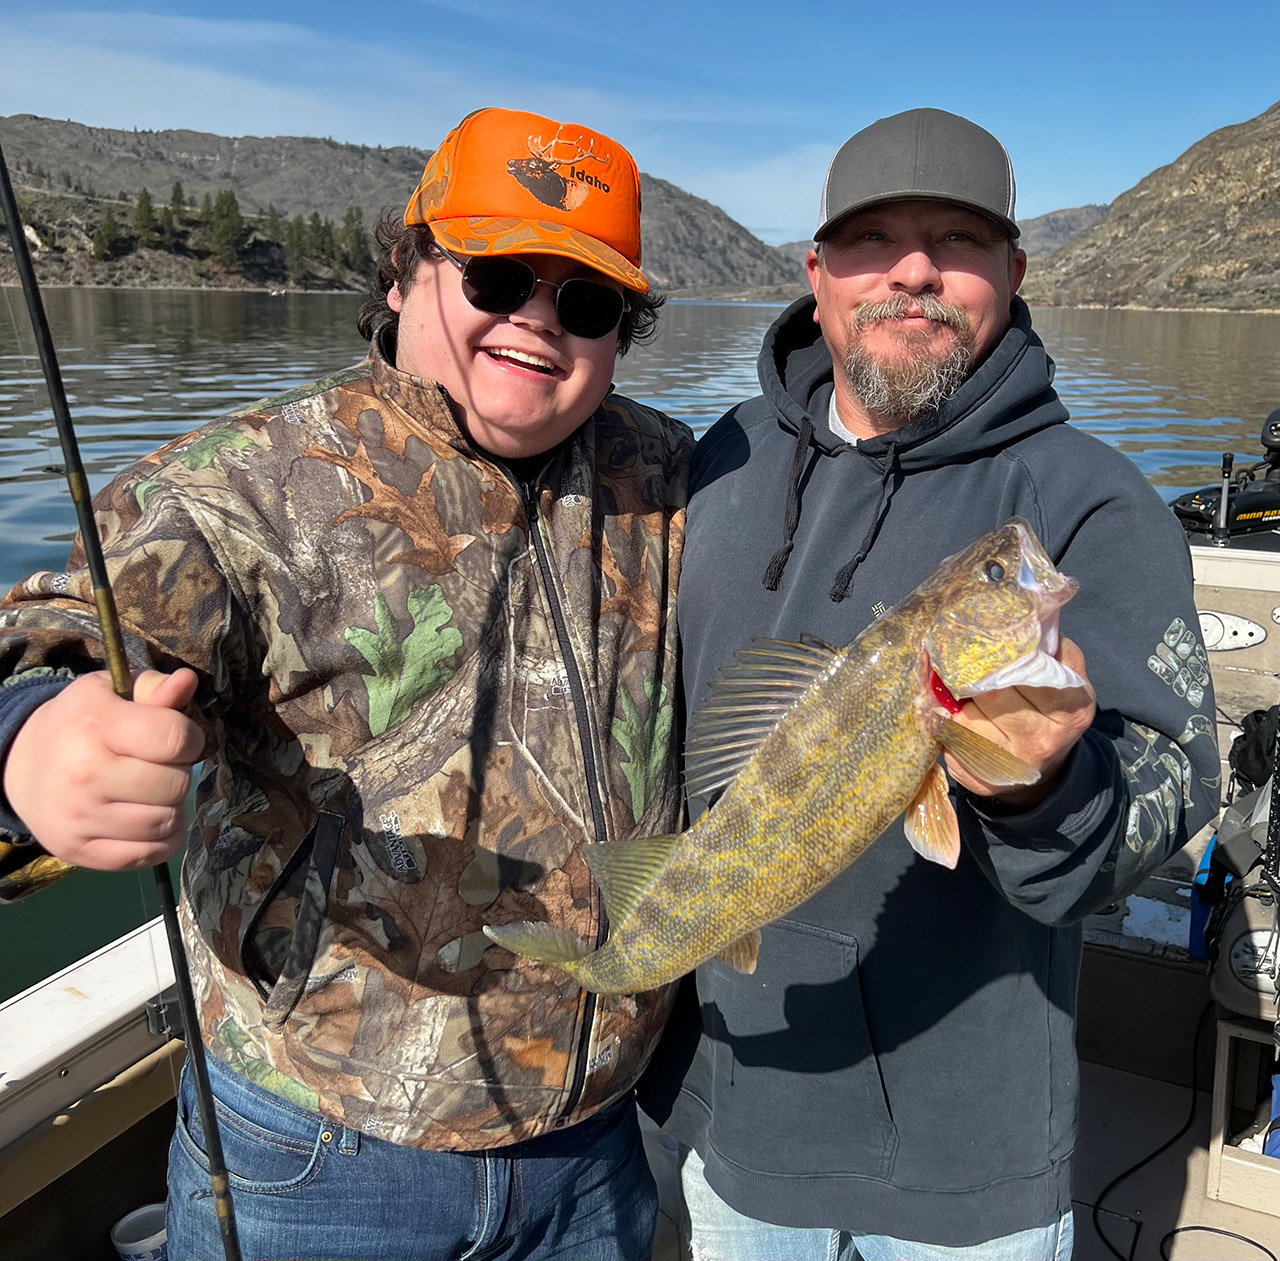 This week's photo is of Michael and James with Michaelâ€™s first walleye